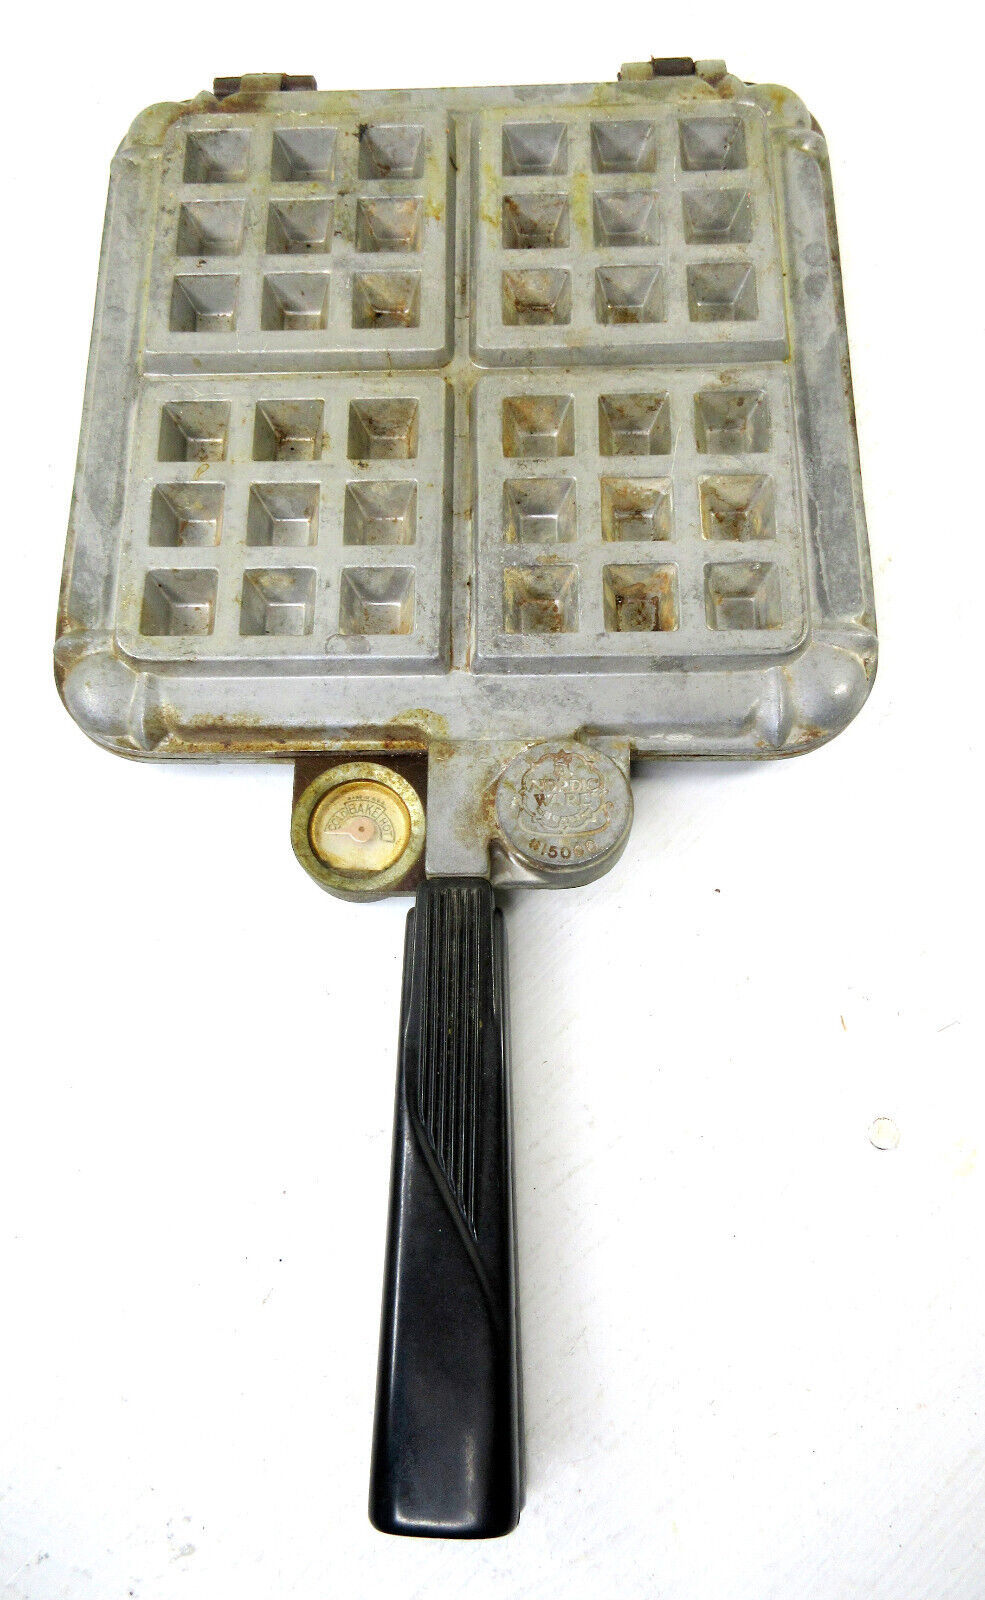 Primary image for Vintage Nordic Ware Belgian Waffler Stove Waffle Iron Maker Camping Fire #15000